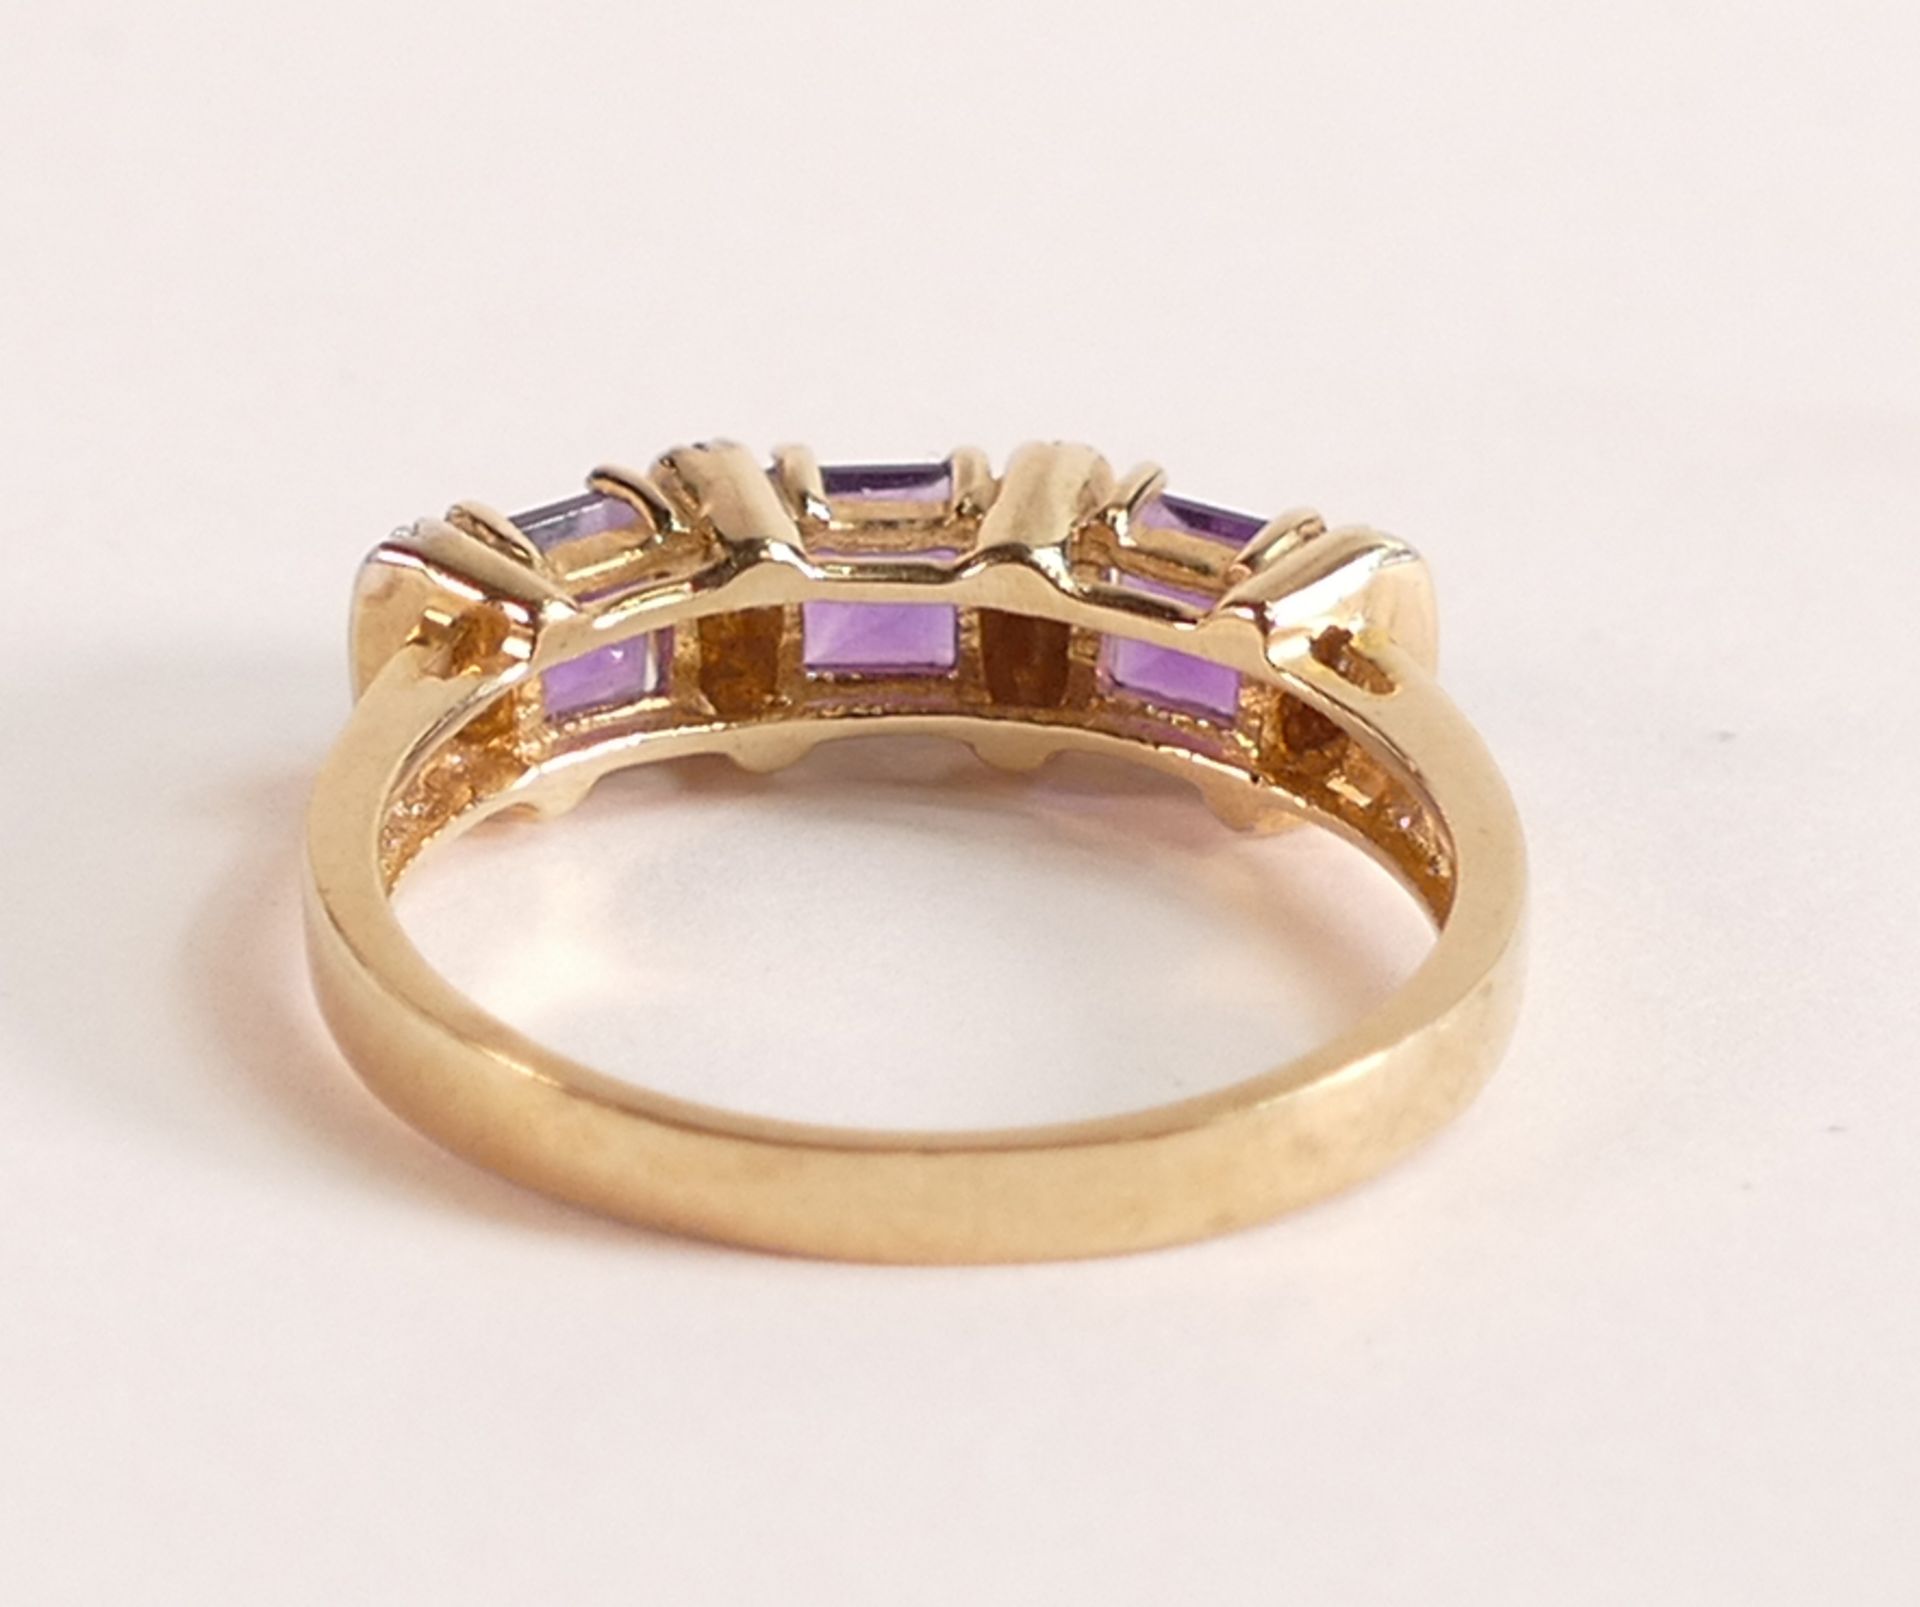 9ct Yellow Gold Amethyst and Diamond Ring, preowned, 2.8 grams, ring size P. - Image 3 of 3